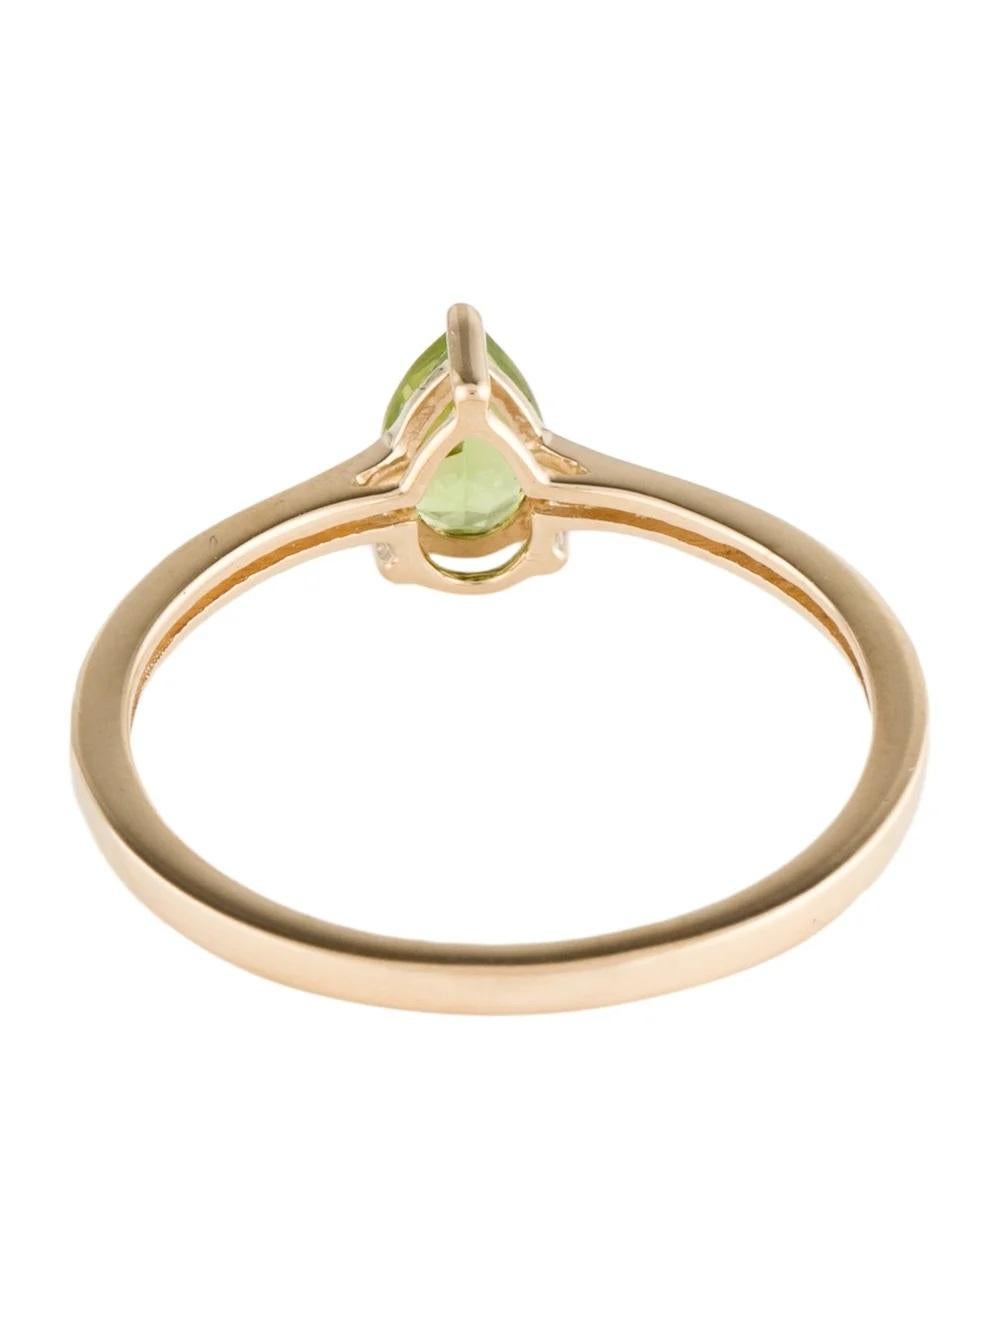 14K Peridot Cocktail Ring, Size 6.75 - Vibrant Green Gemstone, Statement Jewelry In New Condition For Sale In Holtsville, NY